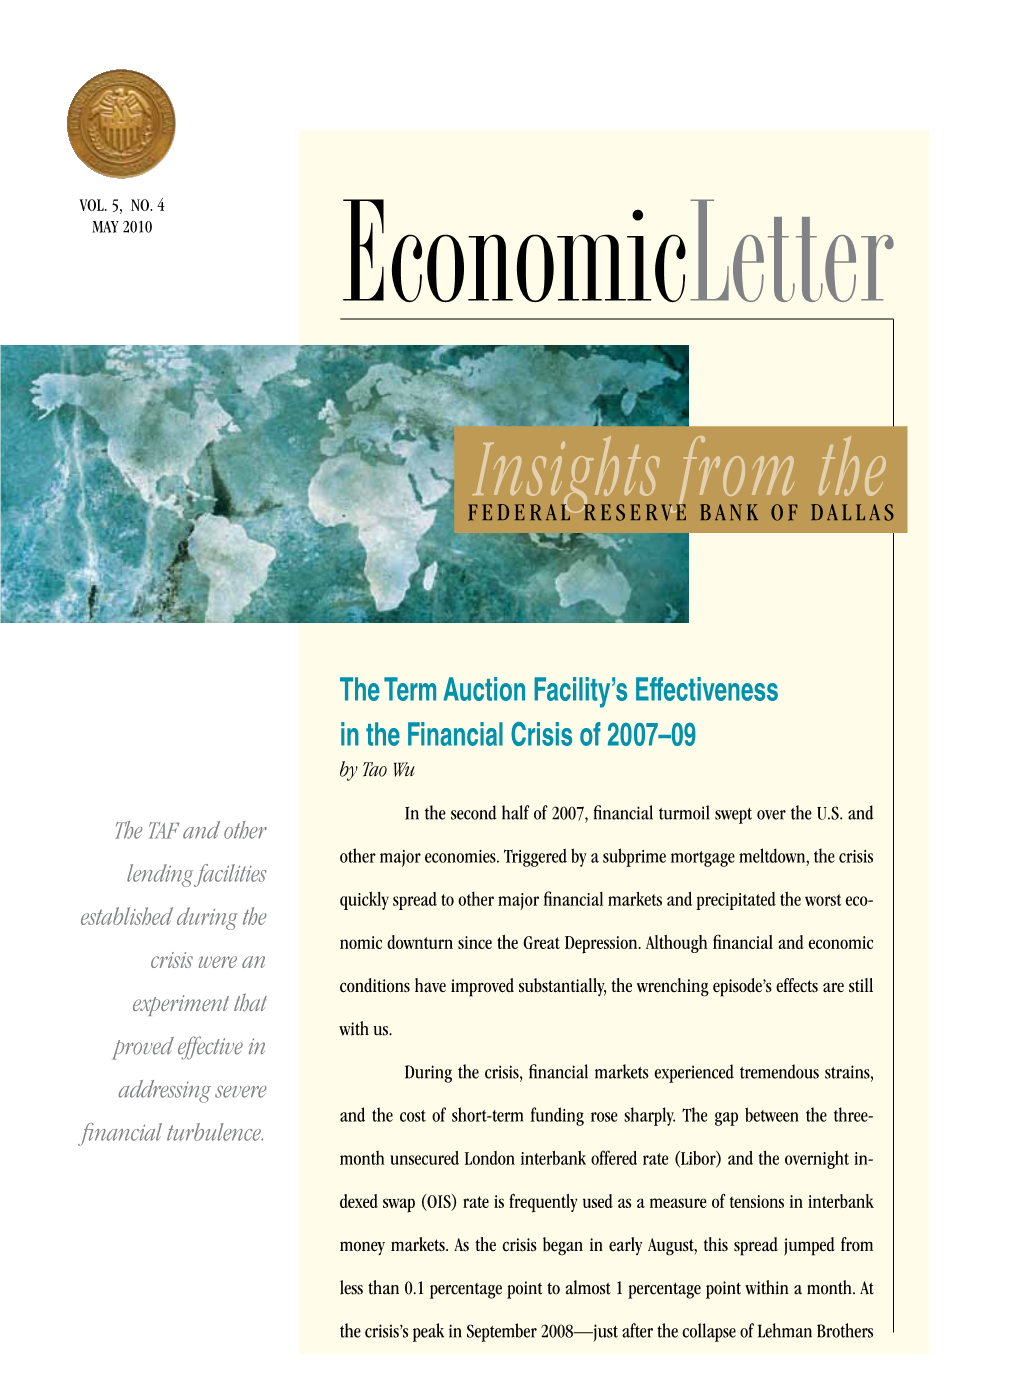 The Term Auction Facility's Effectiveness in the Financial Crisis